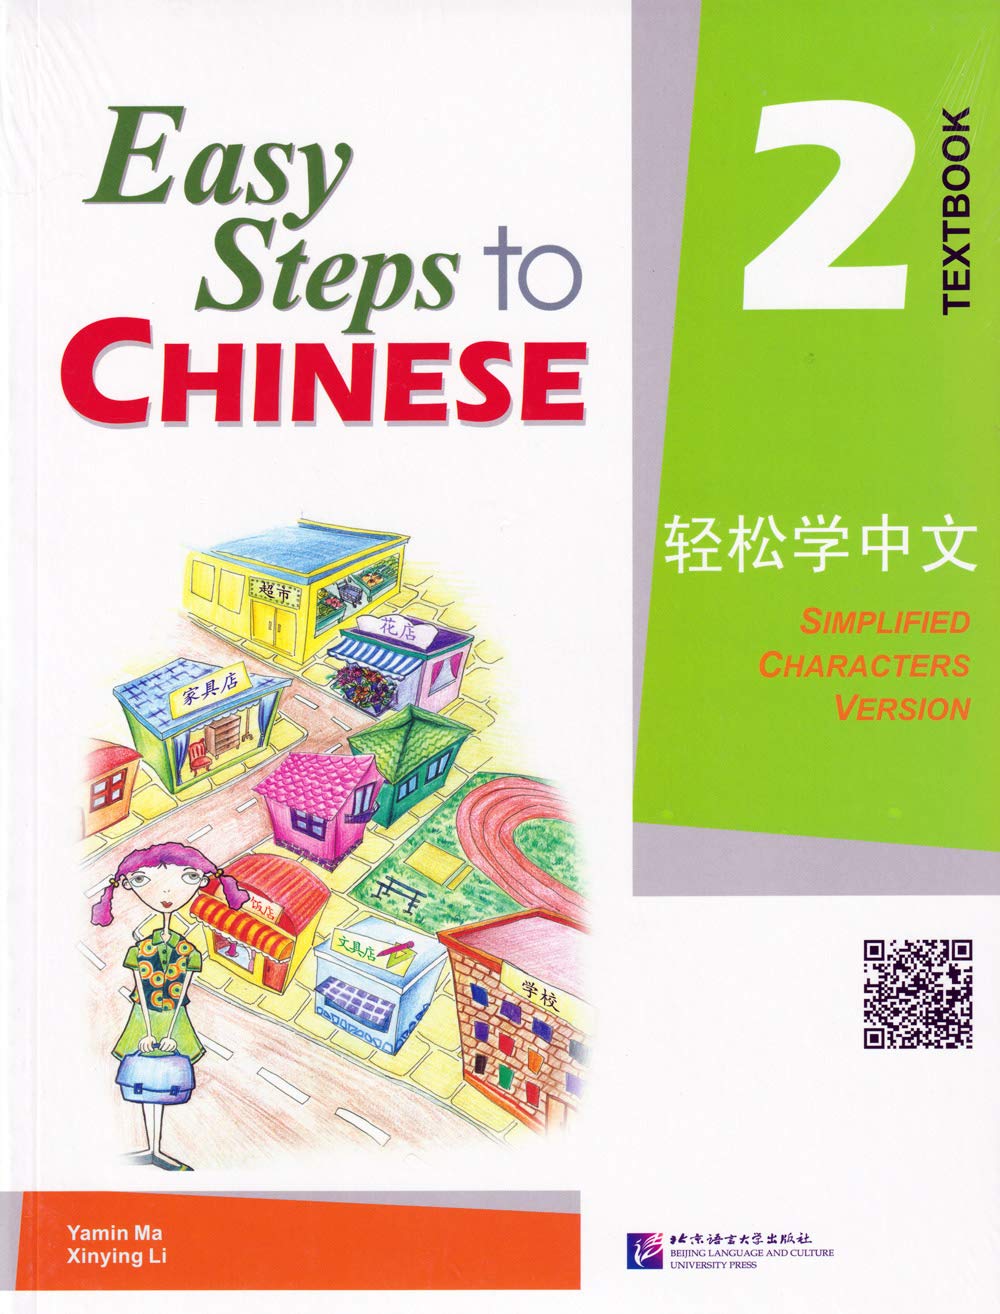 Easy Steps to Chinese Textbook 2